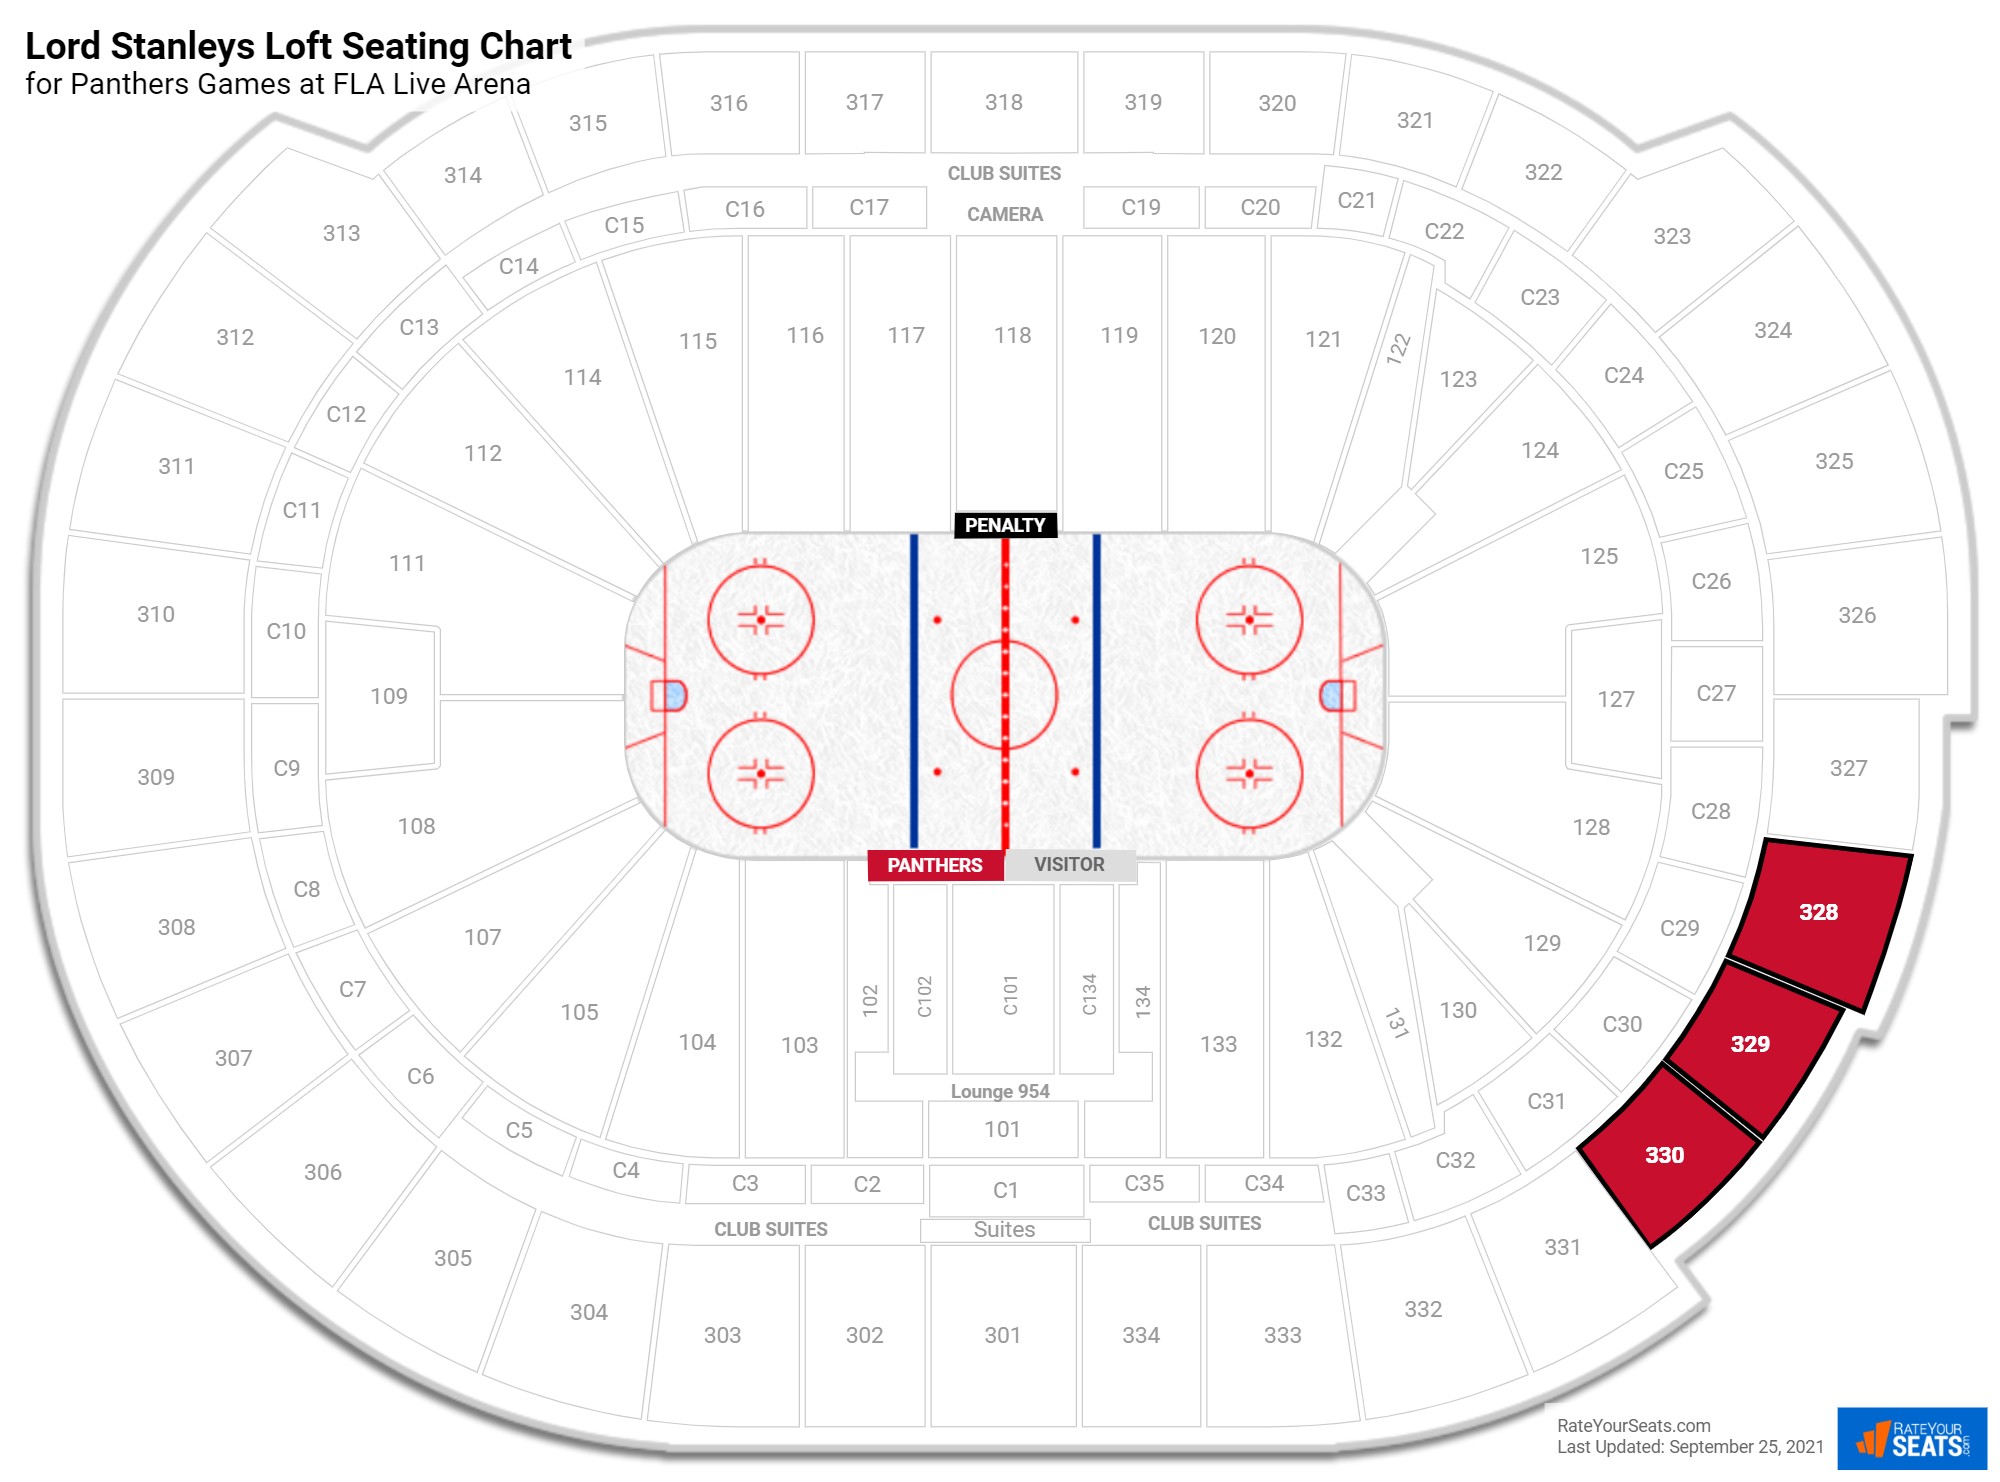 Panthers Lord Stanleys Loft Seating Chart at FLA Live Arena